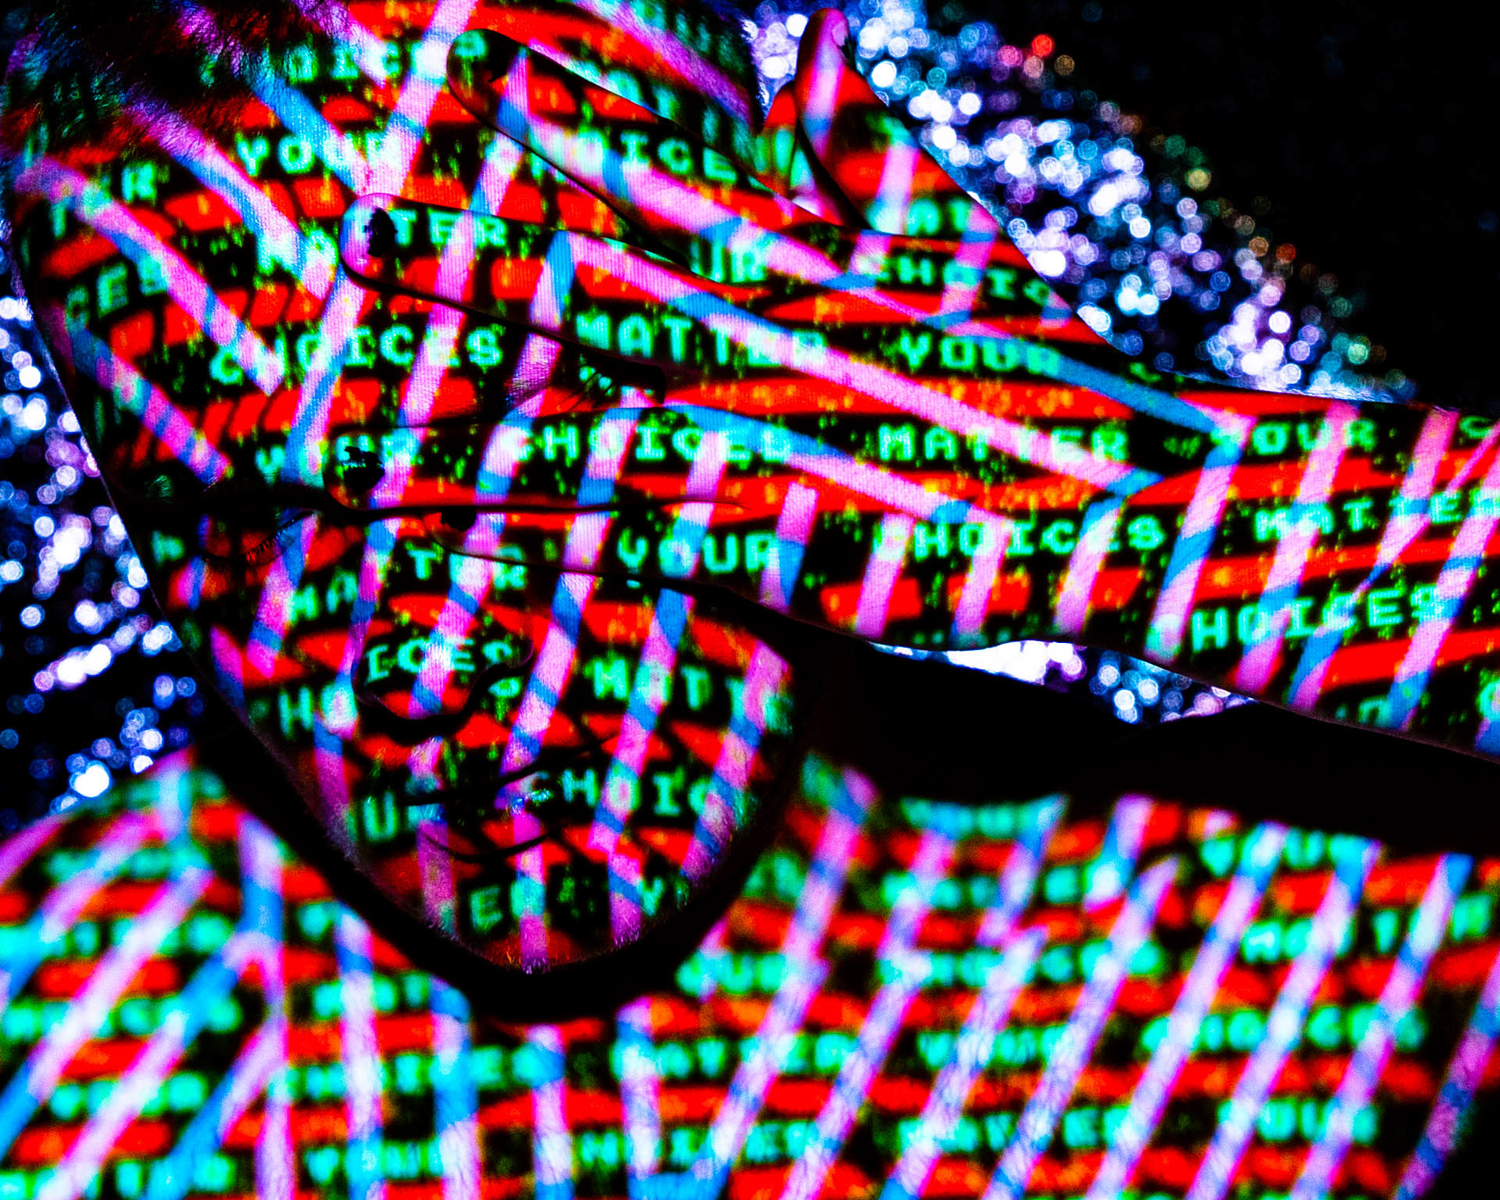 Colour image of a portrait of a man with projected digital imagery covering his face. The words "your choices matter" are displayed on his skin.